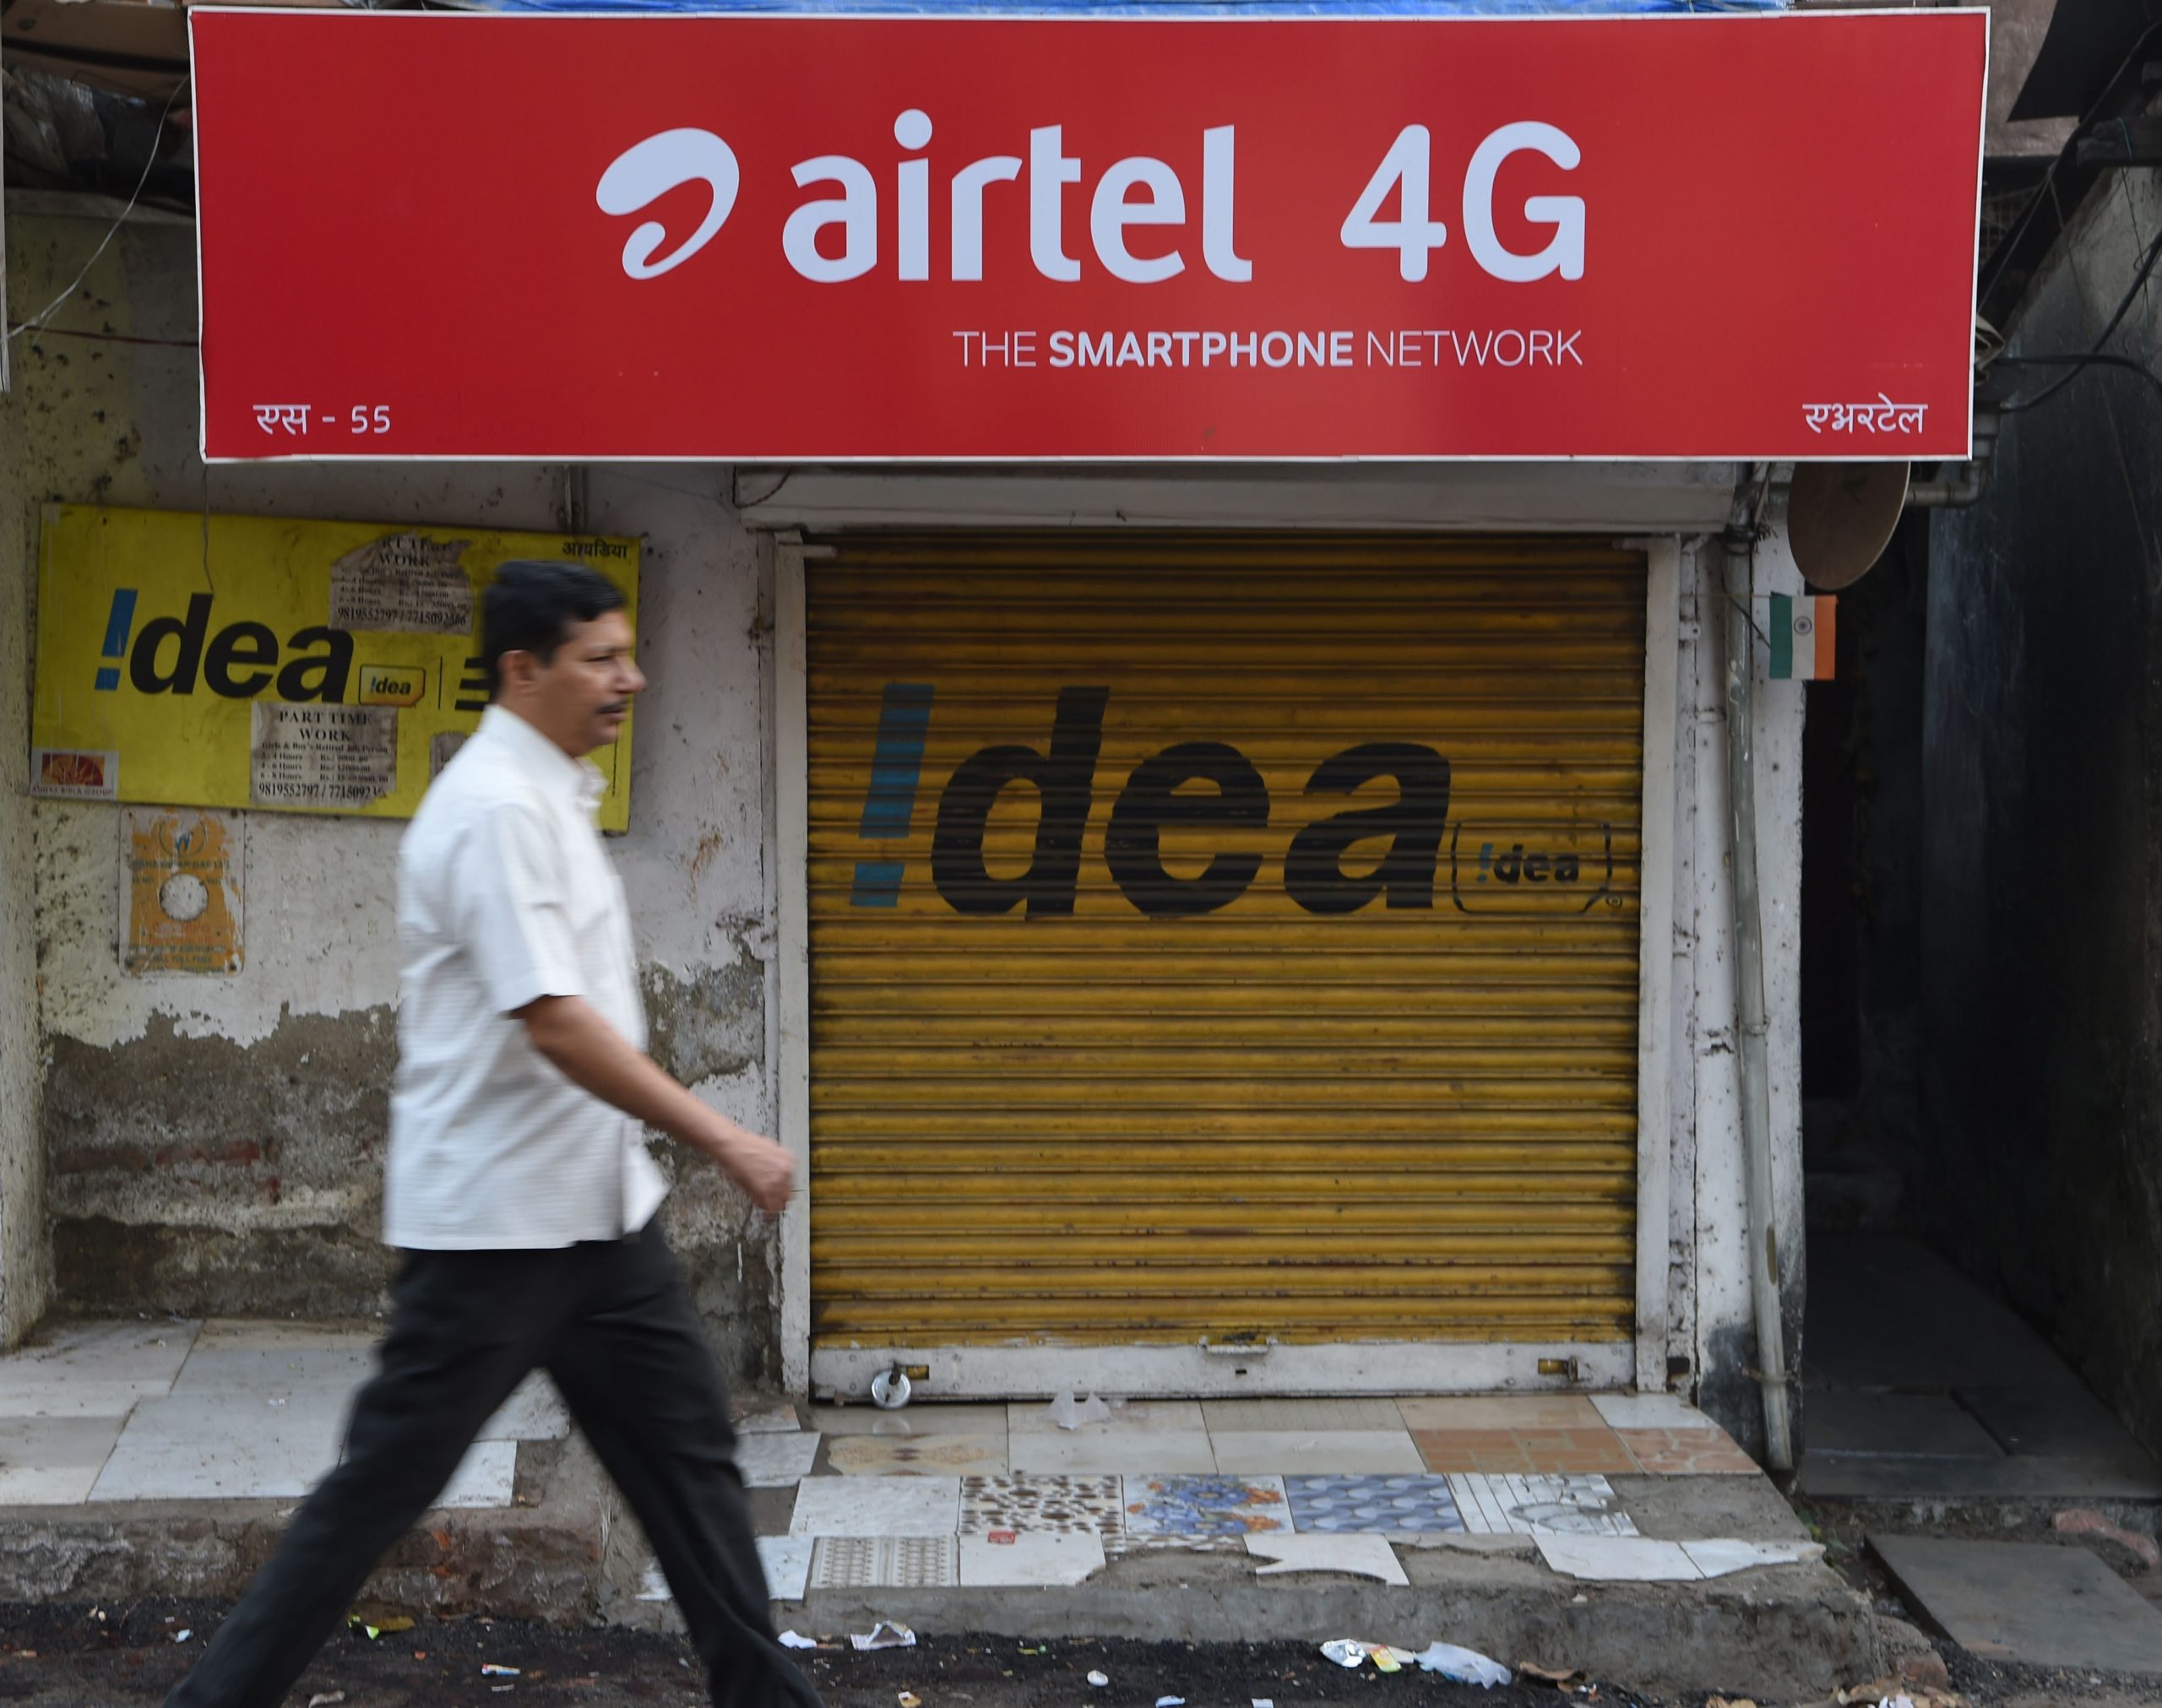 5G: Do people in India even need it?